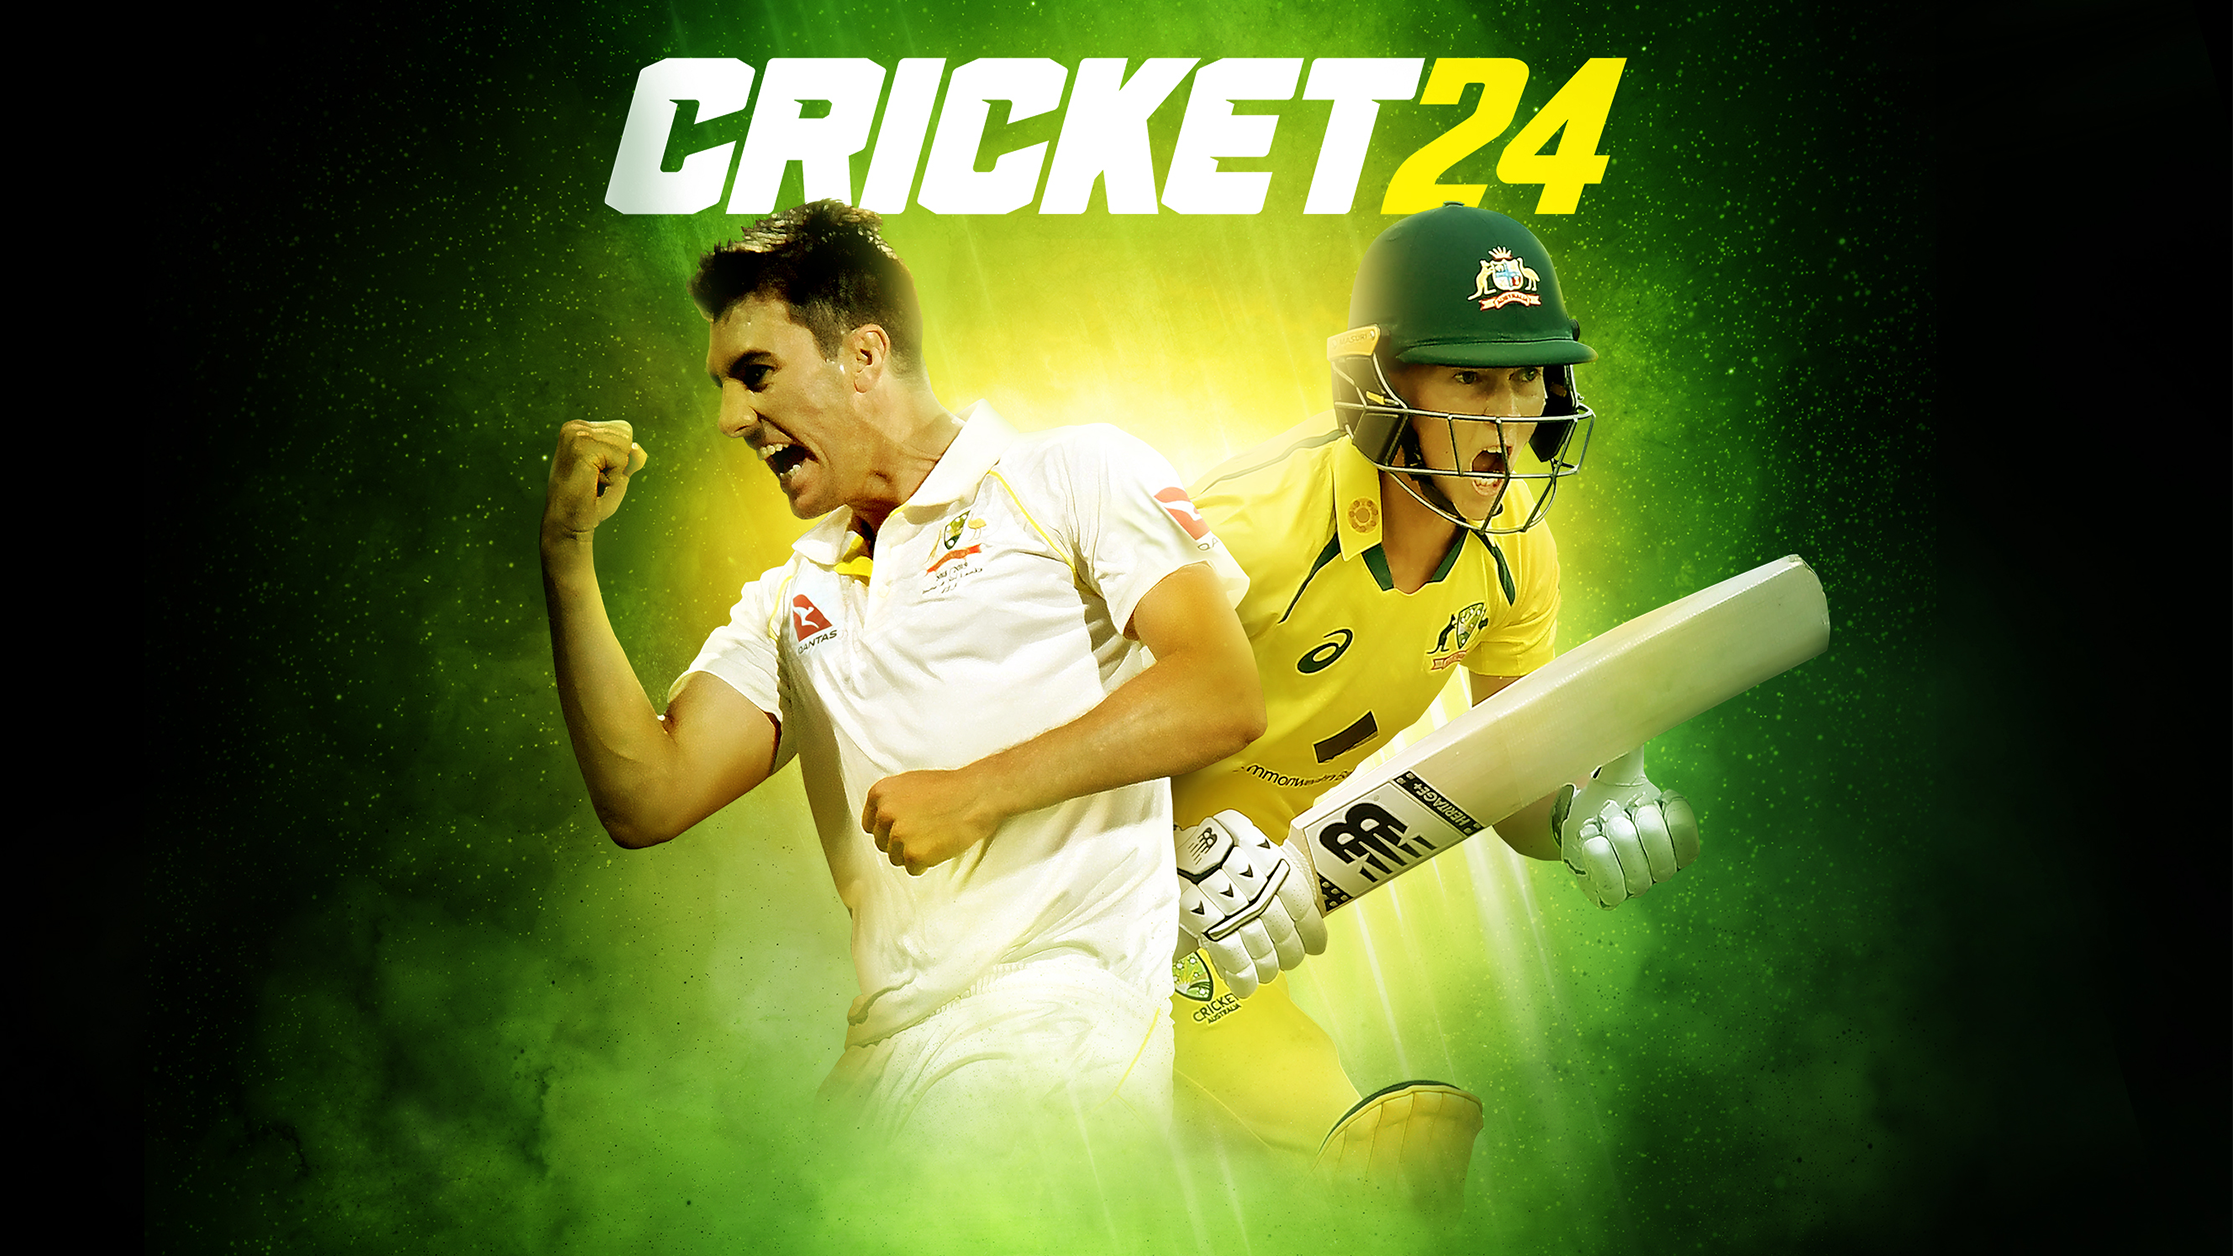 Load video: Check out the all new Cricket 24 Video Game